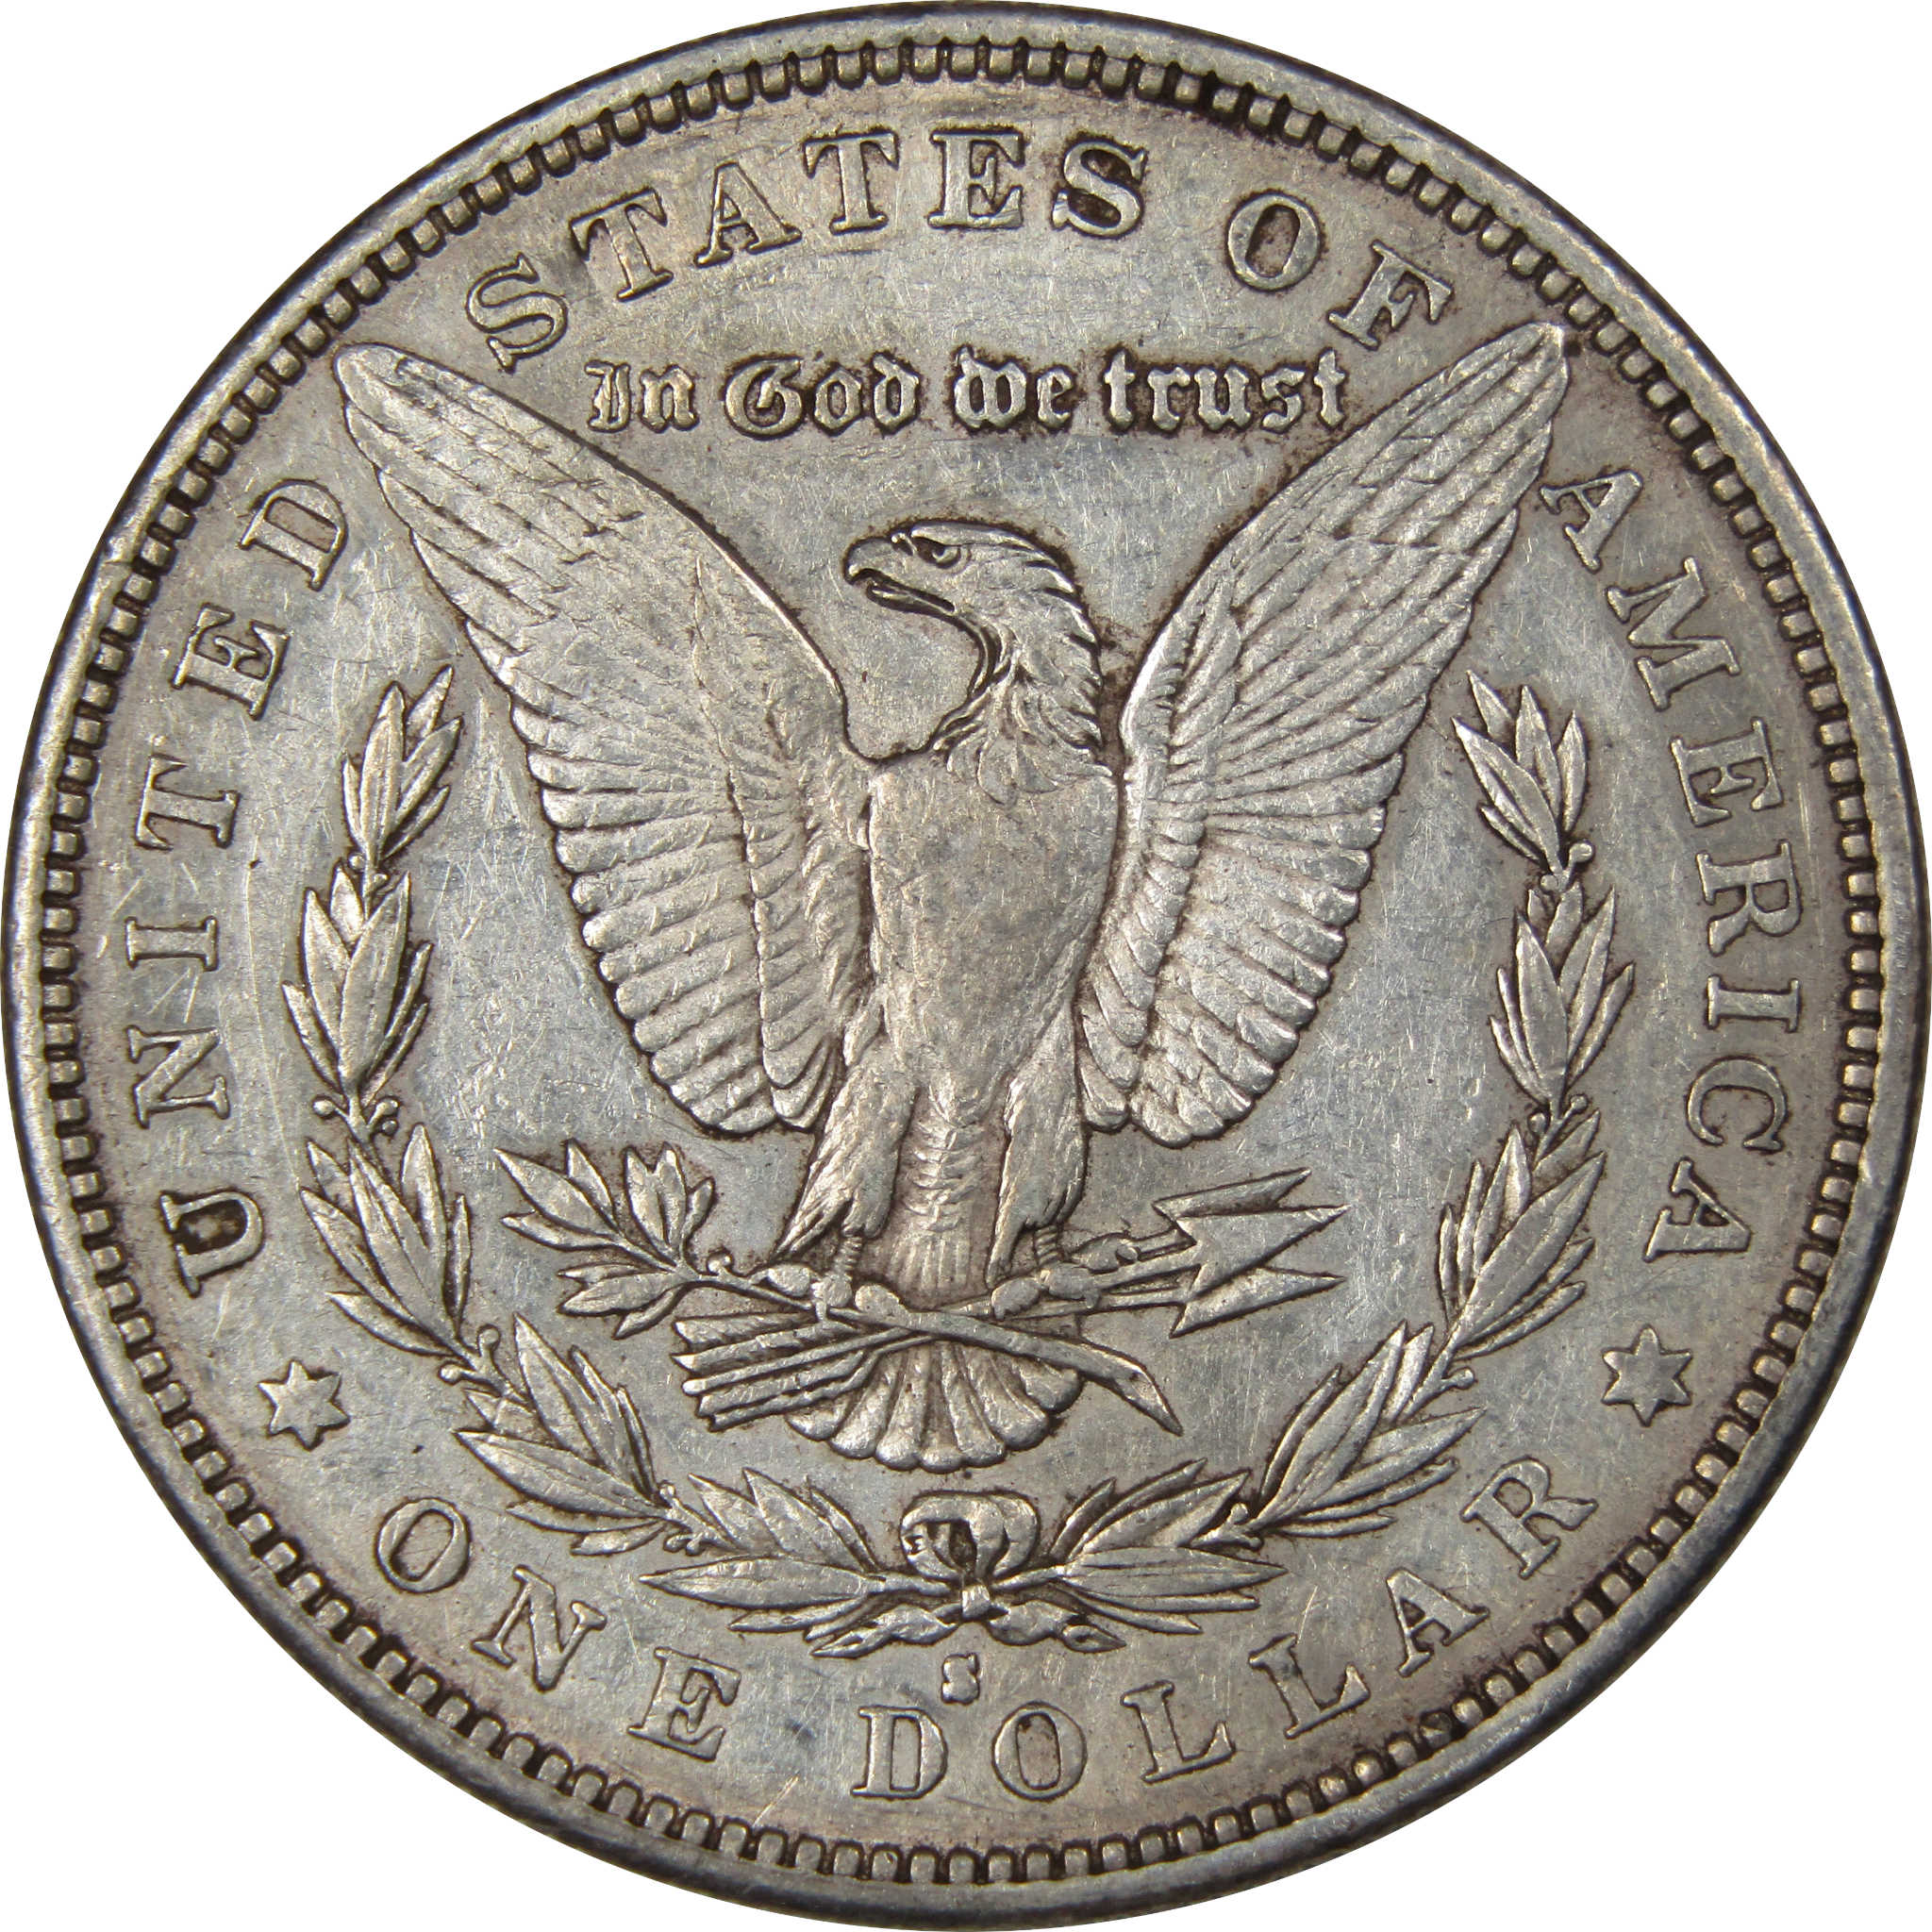 1883 S Morgan Dollar XF EF Extremely Fine 90% Silver Coin SKU:I1778 - Morgan coin - Morgan silver dollar - Morgan silver dollar for sale - Profile Coins &amp; Collectibles